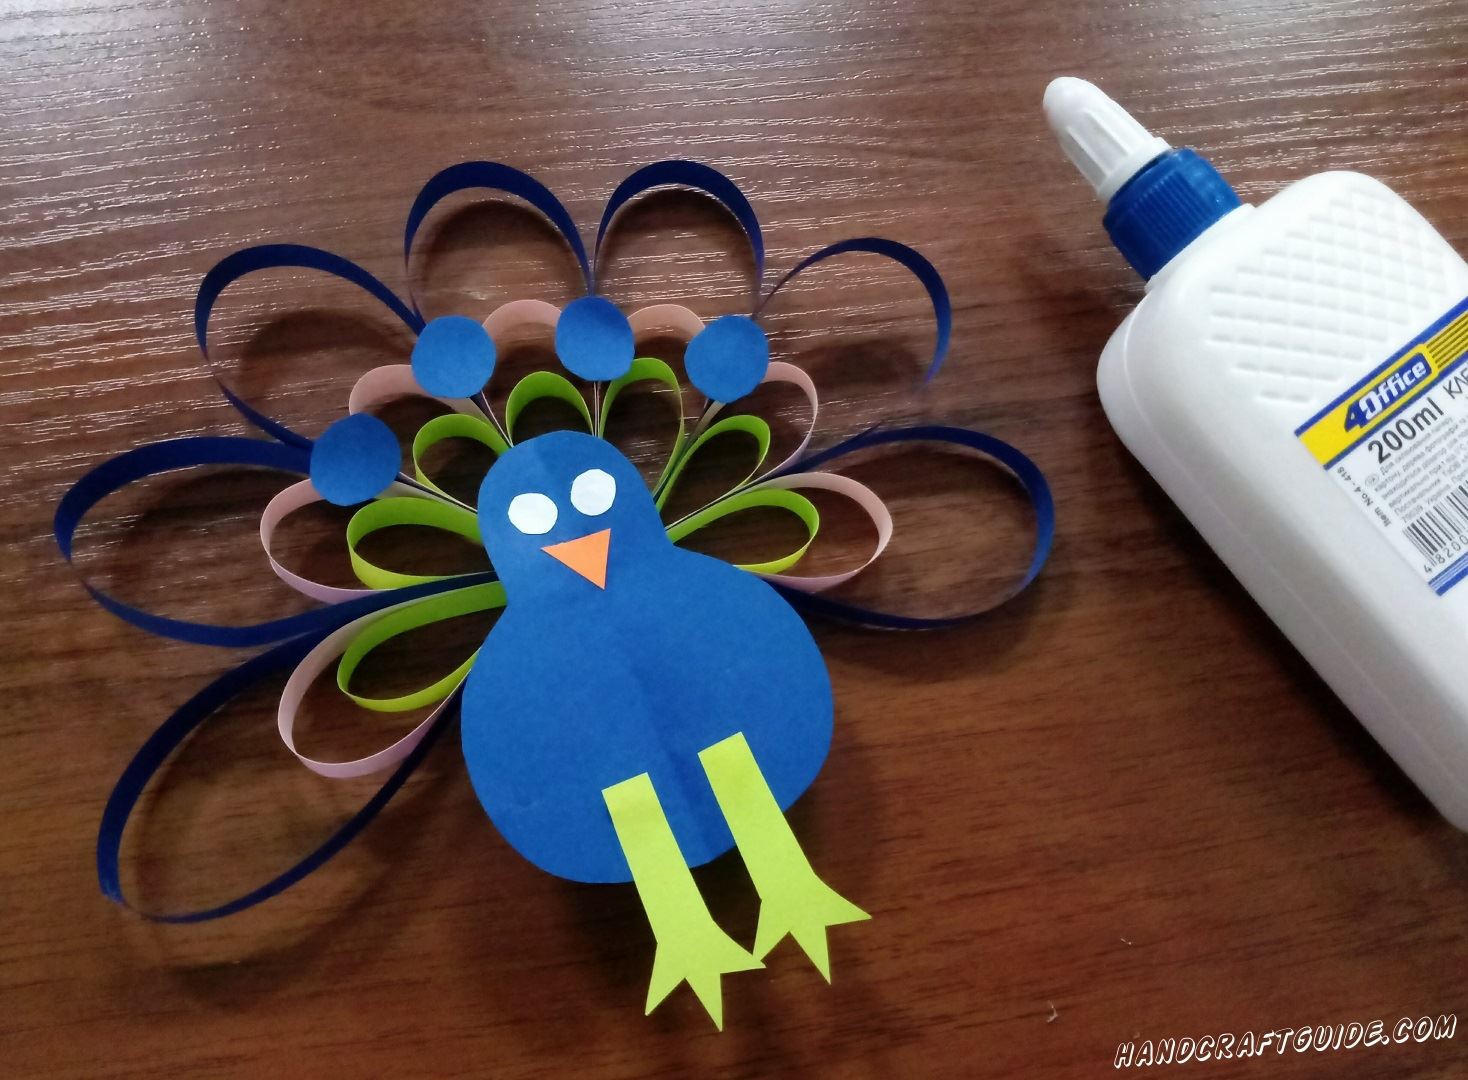 Peacock - Paper crafts, Birds, for 8 years kids | HandCraftGuide